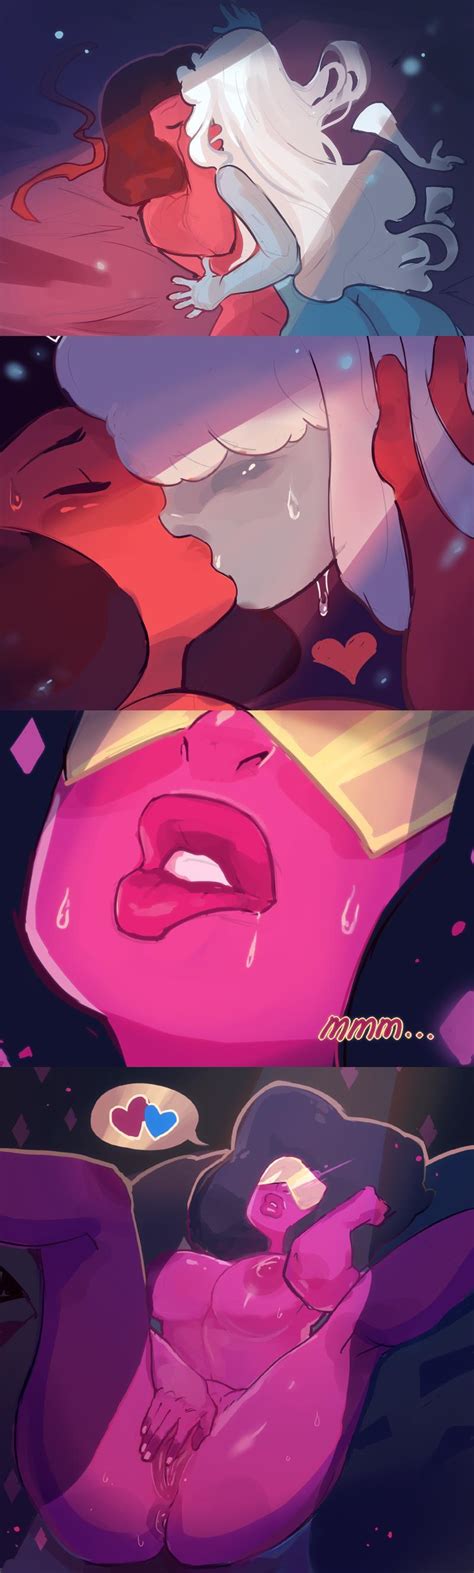 ruby sapphire and garnet steven universe sorted by